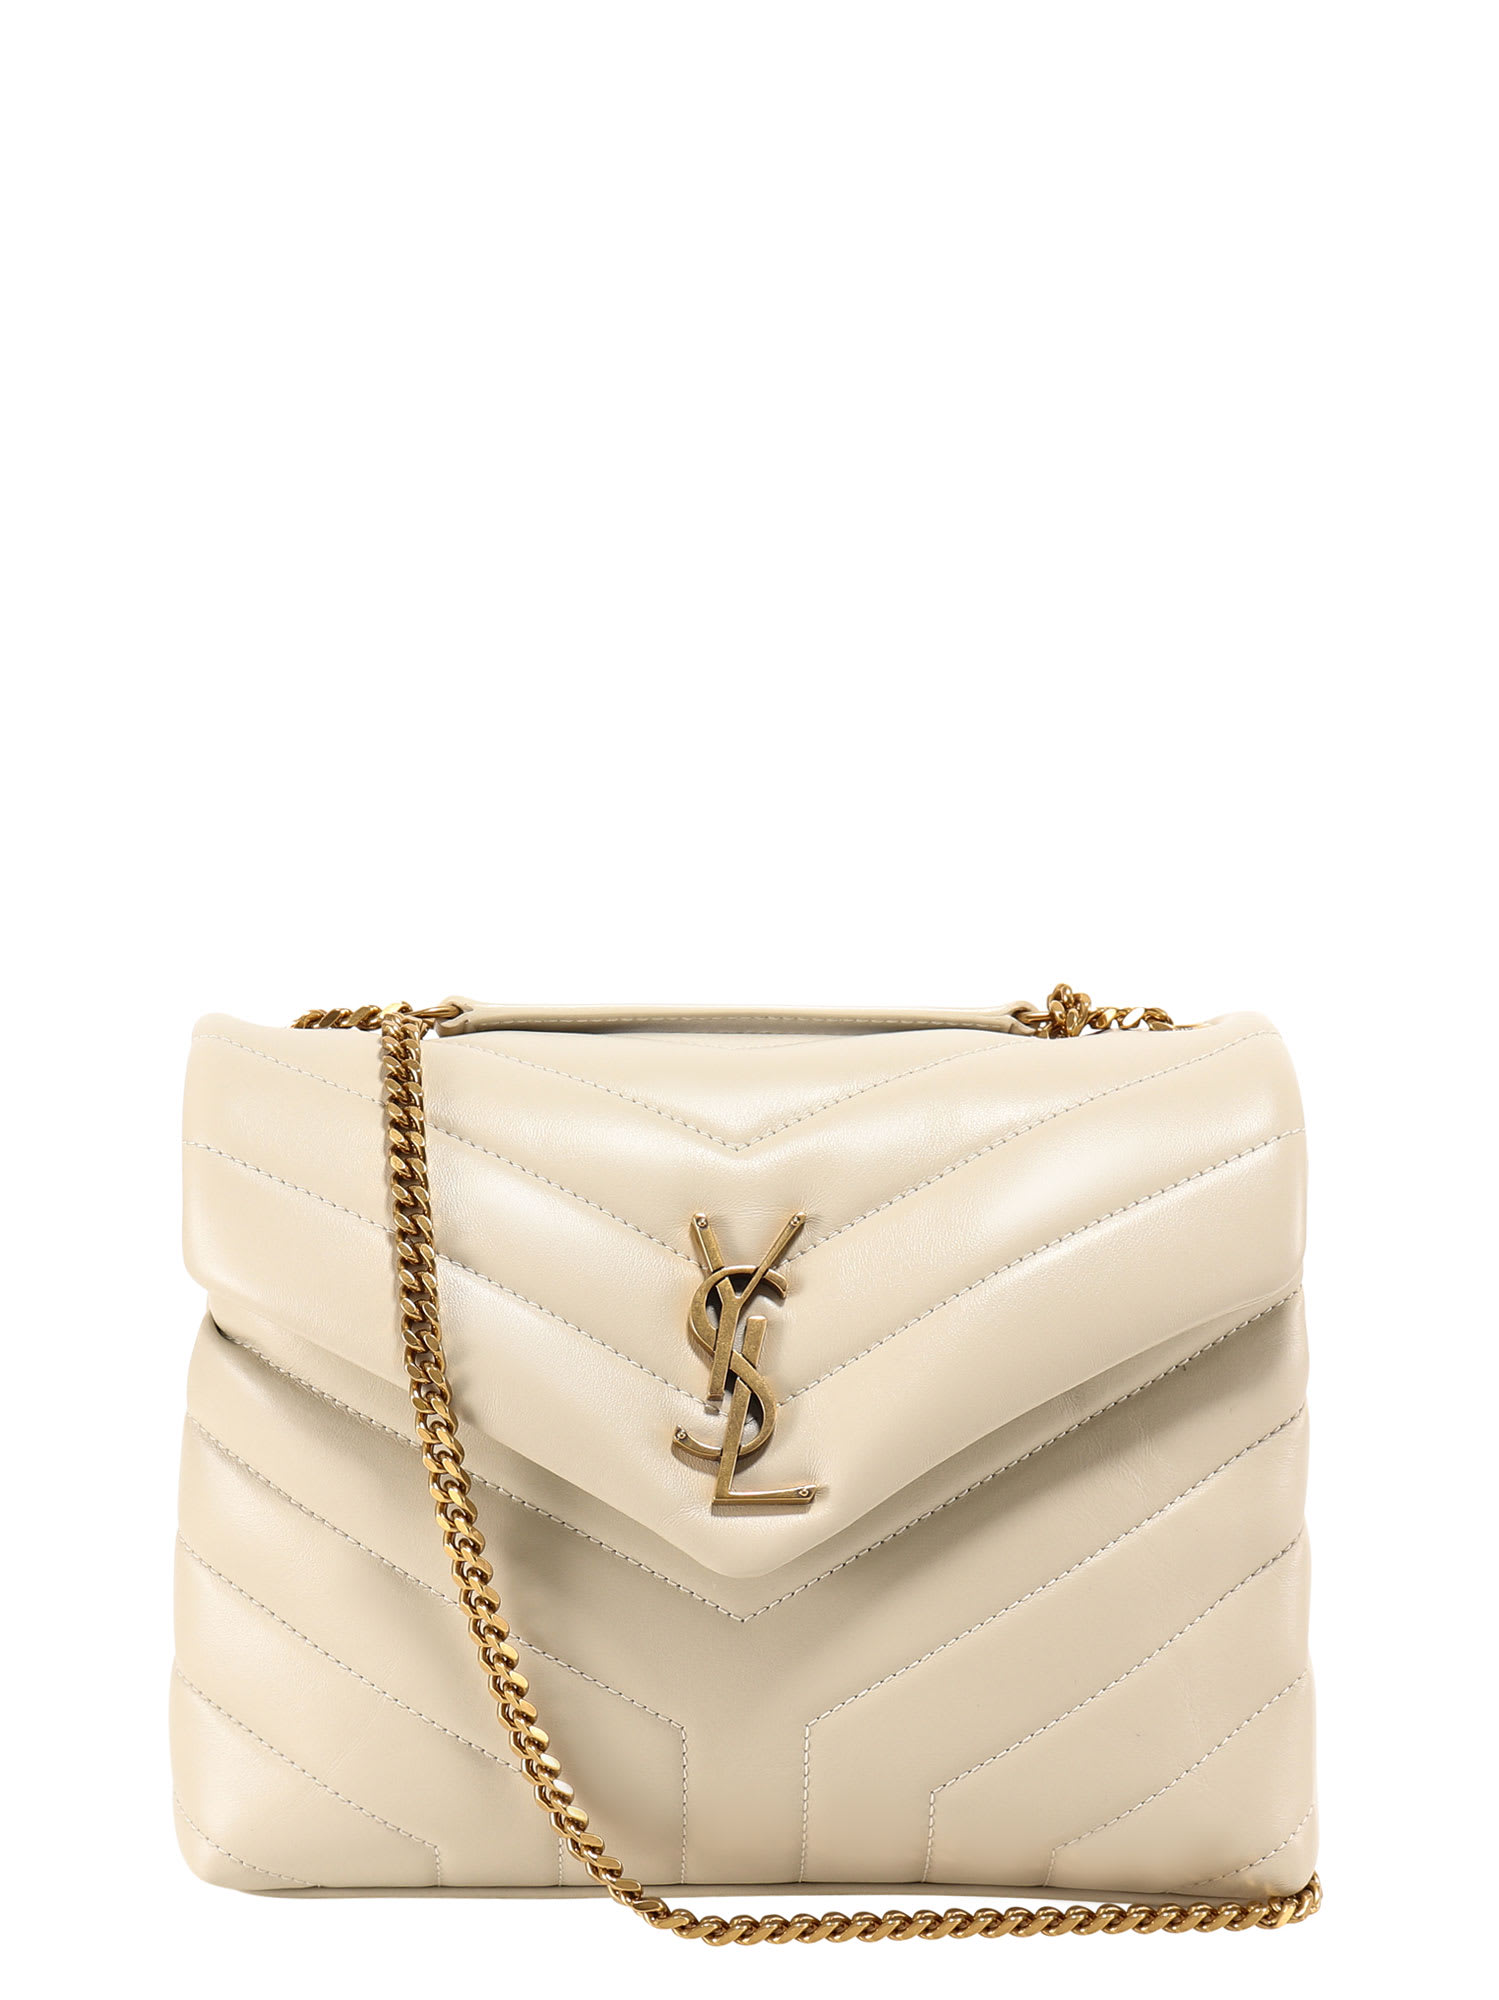 SAINT LAURENT SMALL LOULOU BAG IN QUILTED LEATHER